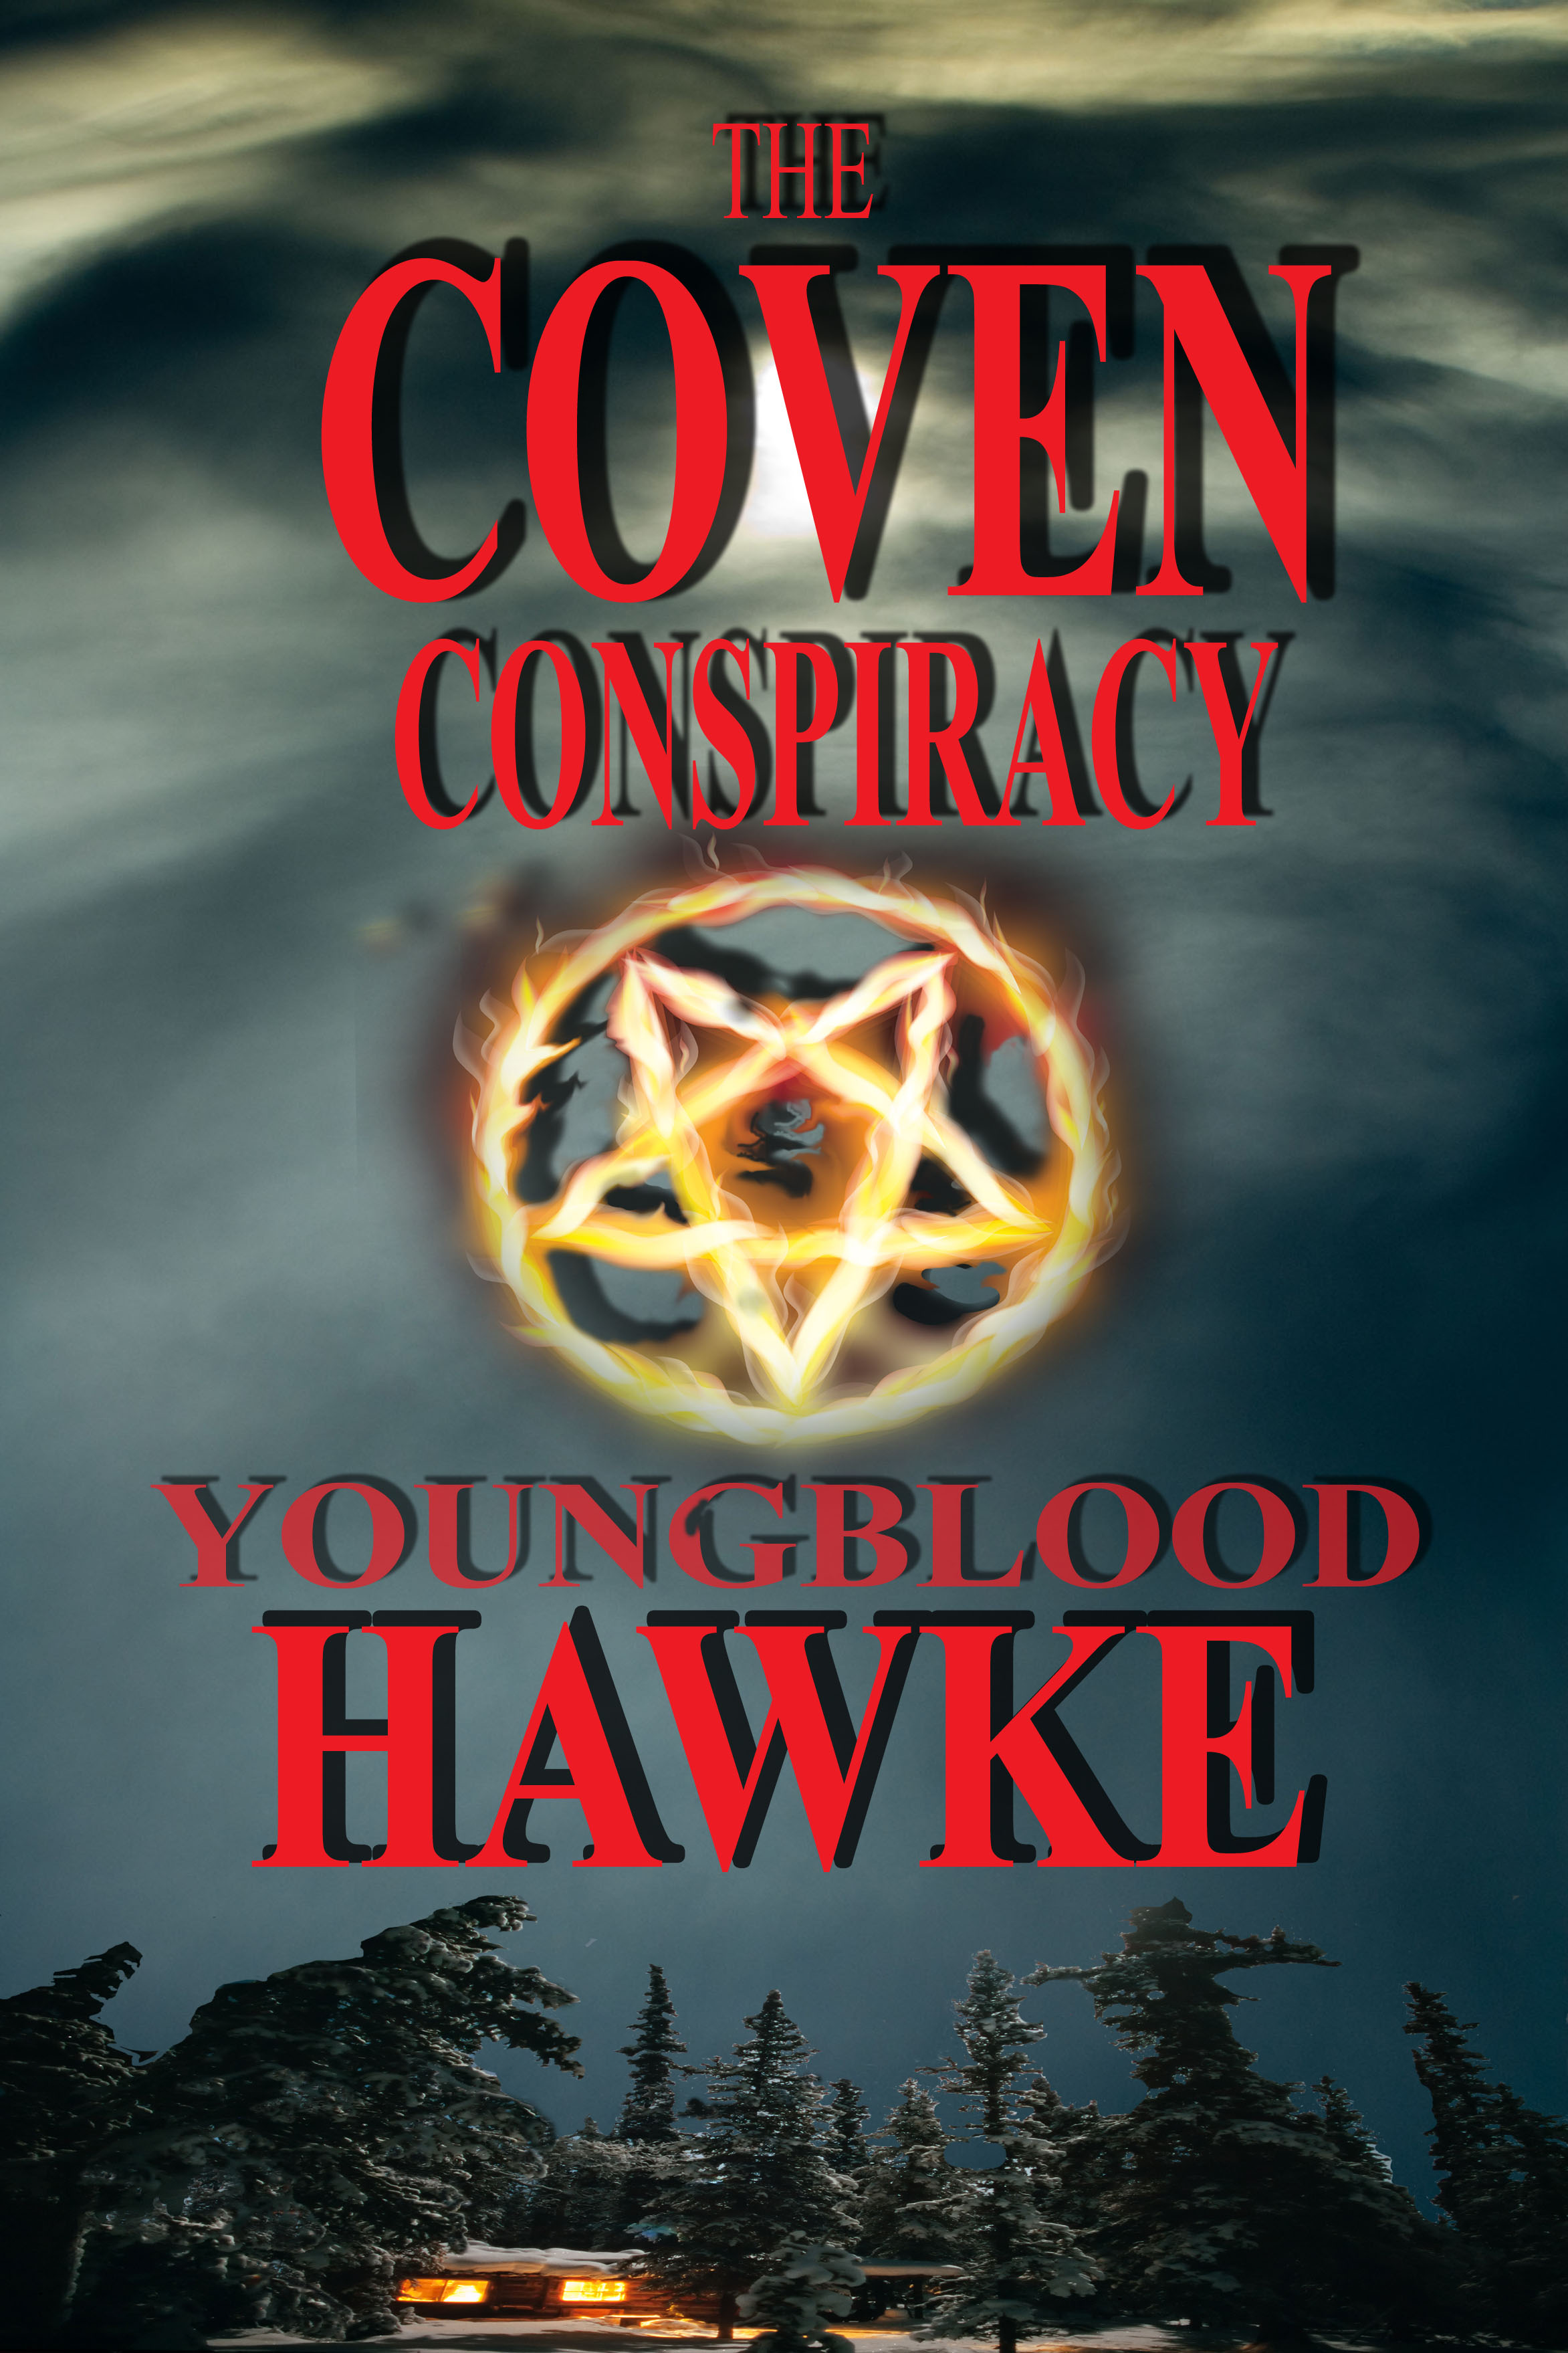 The Coven Conspiracy